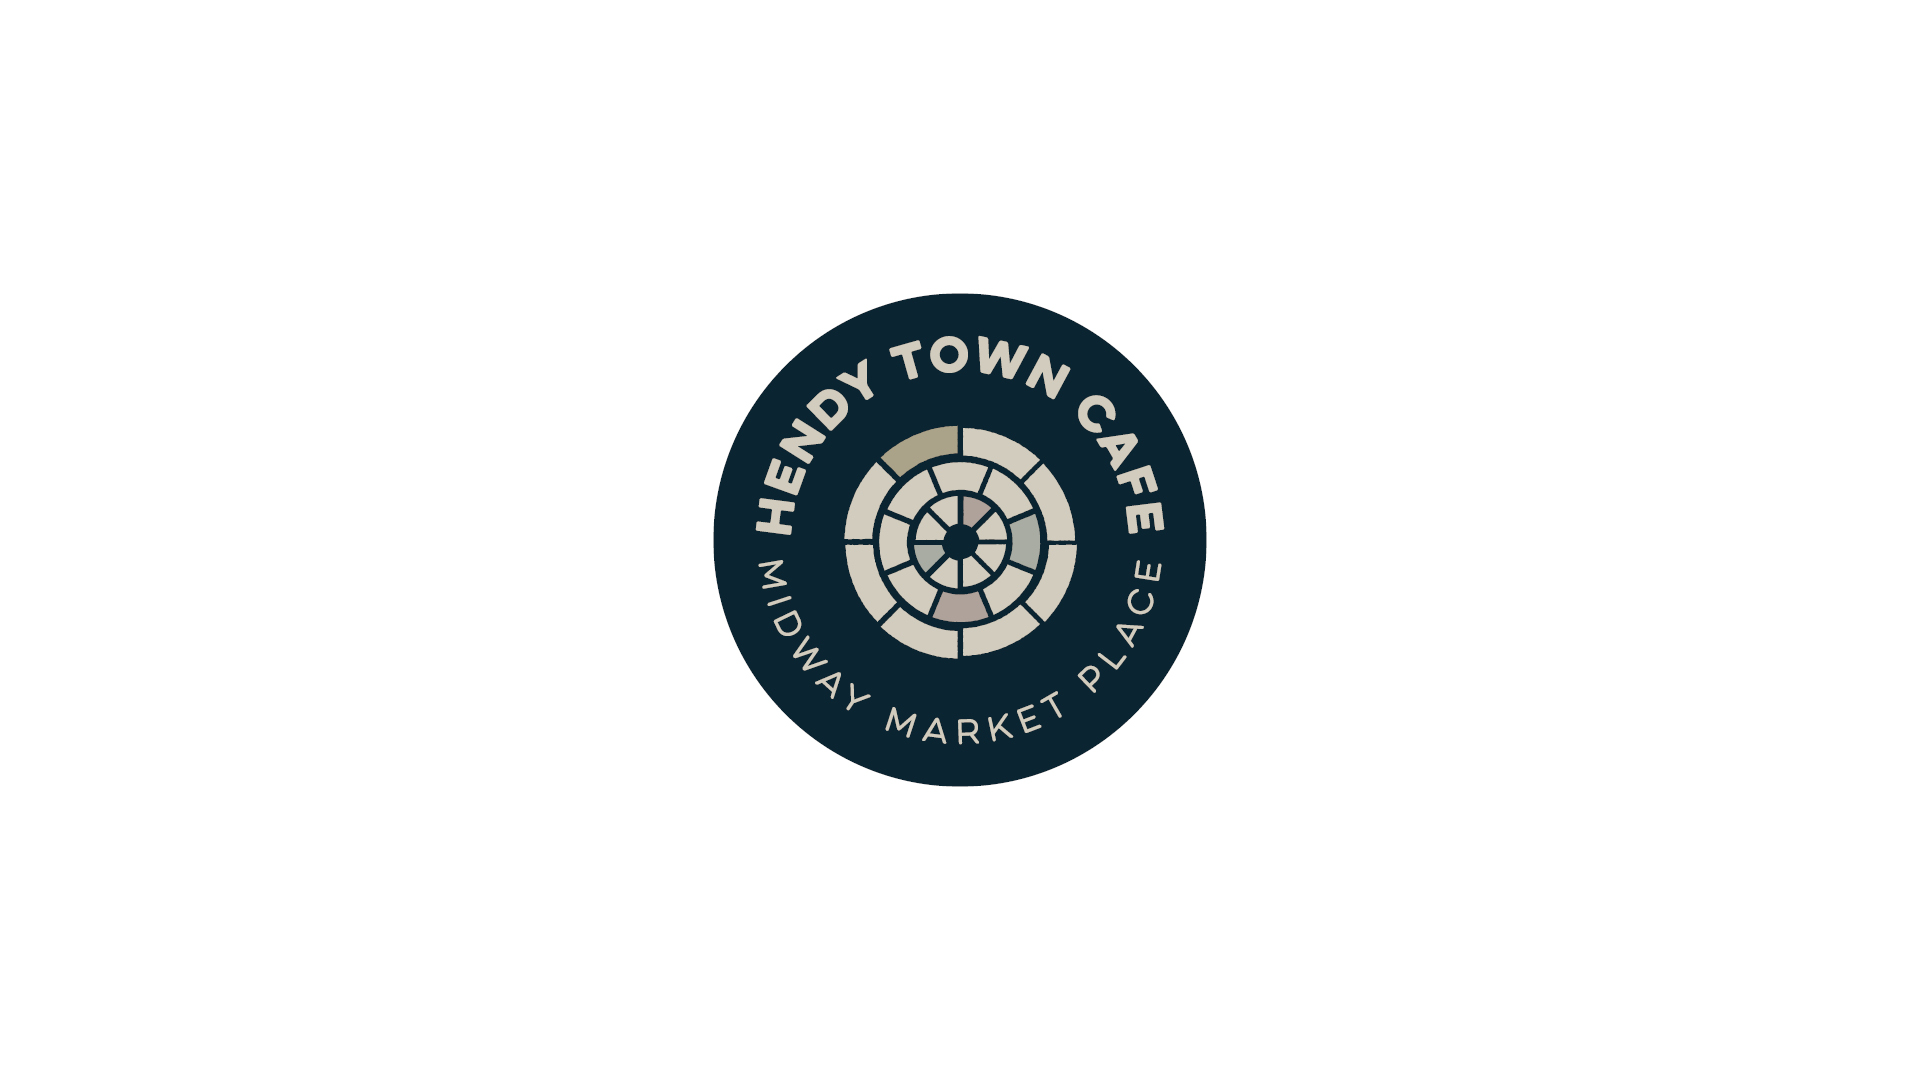 Hendy Town Cafe Logo and Branding Design - Saunders Design Group